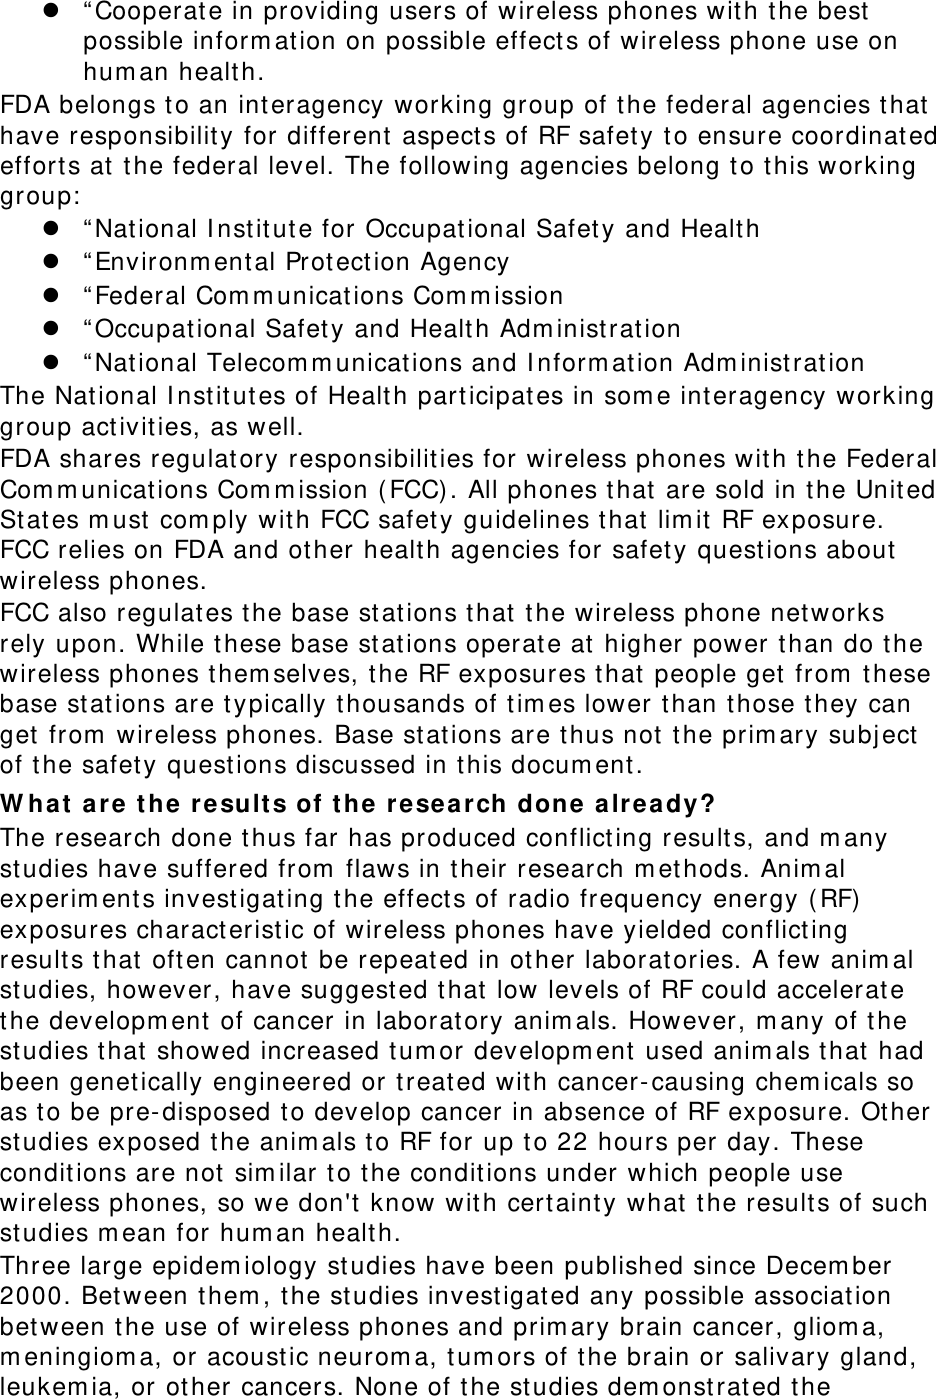 z “ Cooperat e in providing users of wireless phones wit h t he best possible inform at ion on possible effects of wireless phone use on hum an health. FDA belongs to an interagency working group of t he federal agencies that have responsibility for different aspects of RF safet y t o ensure coordinat ed effort s at  t he federal level. The following agencies belong t o t his working group:  z “ Nat ional I nstit ut e for Occupat ional Safet y and Healt h z “ Environm ent al Protection Agency z “ Federal Com m unicat ions Com m ission z “ Occupat ional Safet y and Health Adm inistrat ion z “ Nat ional Telecom m unicat ions and I nform at ion Adm inistration The National I nstitut es of Health part icipat es in som e interagency working group act ivities, as well. FDA shares regulatory responsibilit ies for wireless phones wit h t he Federal Com m unicat ions Com m ission ( FCC). All phones that are sold in t he Unit ed St ates m ust com ply with FCC safet y guidelines that  lim it RF exposure. FCC relies on FDA and other health agencies for safet y questions about wireless phones. FCC also regulates the base stat ions that the wireless phone net works rely upon. While t hese base st at ions operate at  higher power t han do t he wireless phones t hem selves, t he RF exposures that  people get  from  t hese base stat ions are t ypically t housands of t im es lower t han t hose they can get from  wireless phones. Base stat ions are thus not  the prim ary subj ect  of t he safet y questions discussed in this docum ent. W ha t  a r e t he  r esult s of t he  resea r ch done alre a dy? The research done t hus far has produced conflicting result s, and m any studies have suffered from  flaws in t heir research m ethods. Anim al experim ent s investigat ing t he effects of radio frequency energy ( RF)  exposures charact eristic of wireless phones have yielded conflicting result s t hat  oft en cannot  be repeated in other laboratories. A few anim al studies, however, have suggest ed t hat low levels of RF could accelerate the developm ent of cancer in laborat ory anim als. However, m any of t he studies that showed increased t um or developm ent  used anim als that  had been genet ically engineered or treat ed wit h cancer- causing chem icals so as to be pre- disposed t o develop cancer in absence of RF exposure. Other studies exposed t he anim als t o RF for up t o 22 hours per day. These conditions are not sim ilar t o the conditions under which people use wireless phones, so we don&apos;t  know with cert ainty what  the result s of such studies m ean for hum an healt h. Three large epidem iology studies have been published since Decem ber 2000. Between t hem , t he studies invest igat ed any possible associat ion between t he use of wireless phones and prim ary brain cancer, gliom a, m eningiom a, or acoustic neurom a, tum ors of t he brain or salivary gland, leukem ia, or ot her cancers. None of t he studies dem onstrated the 